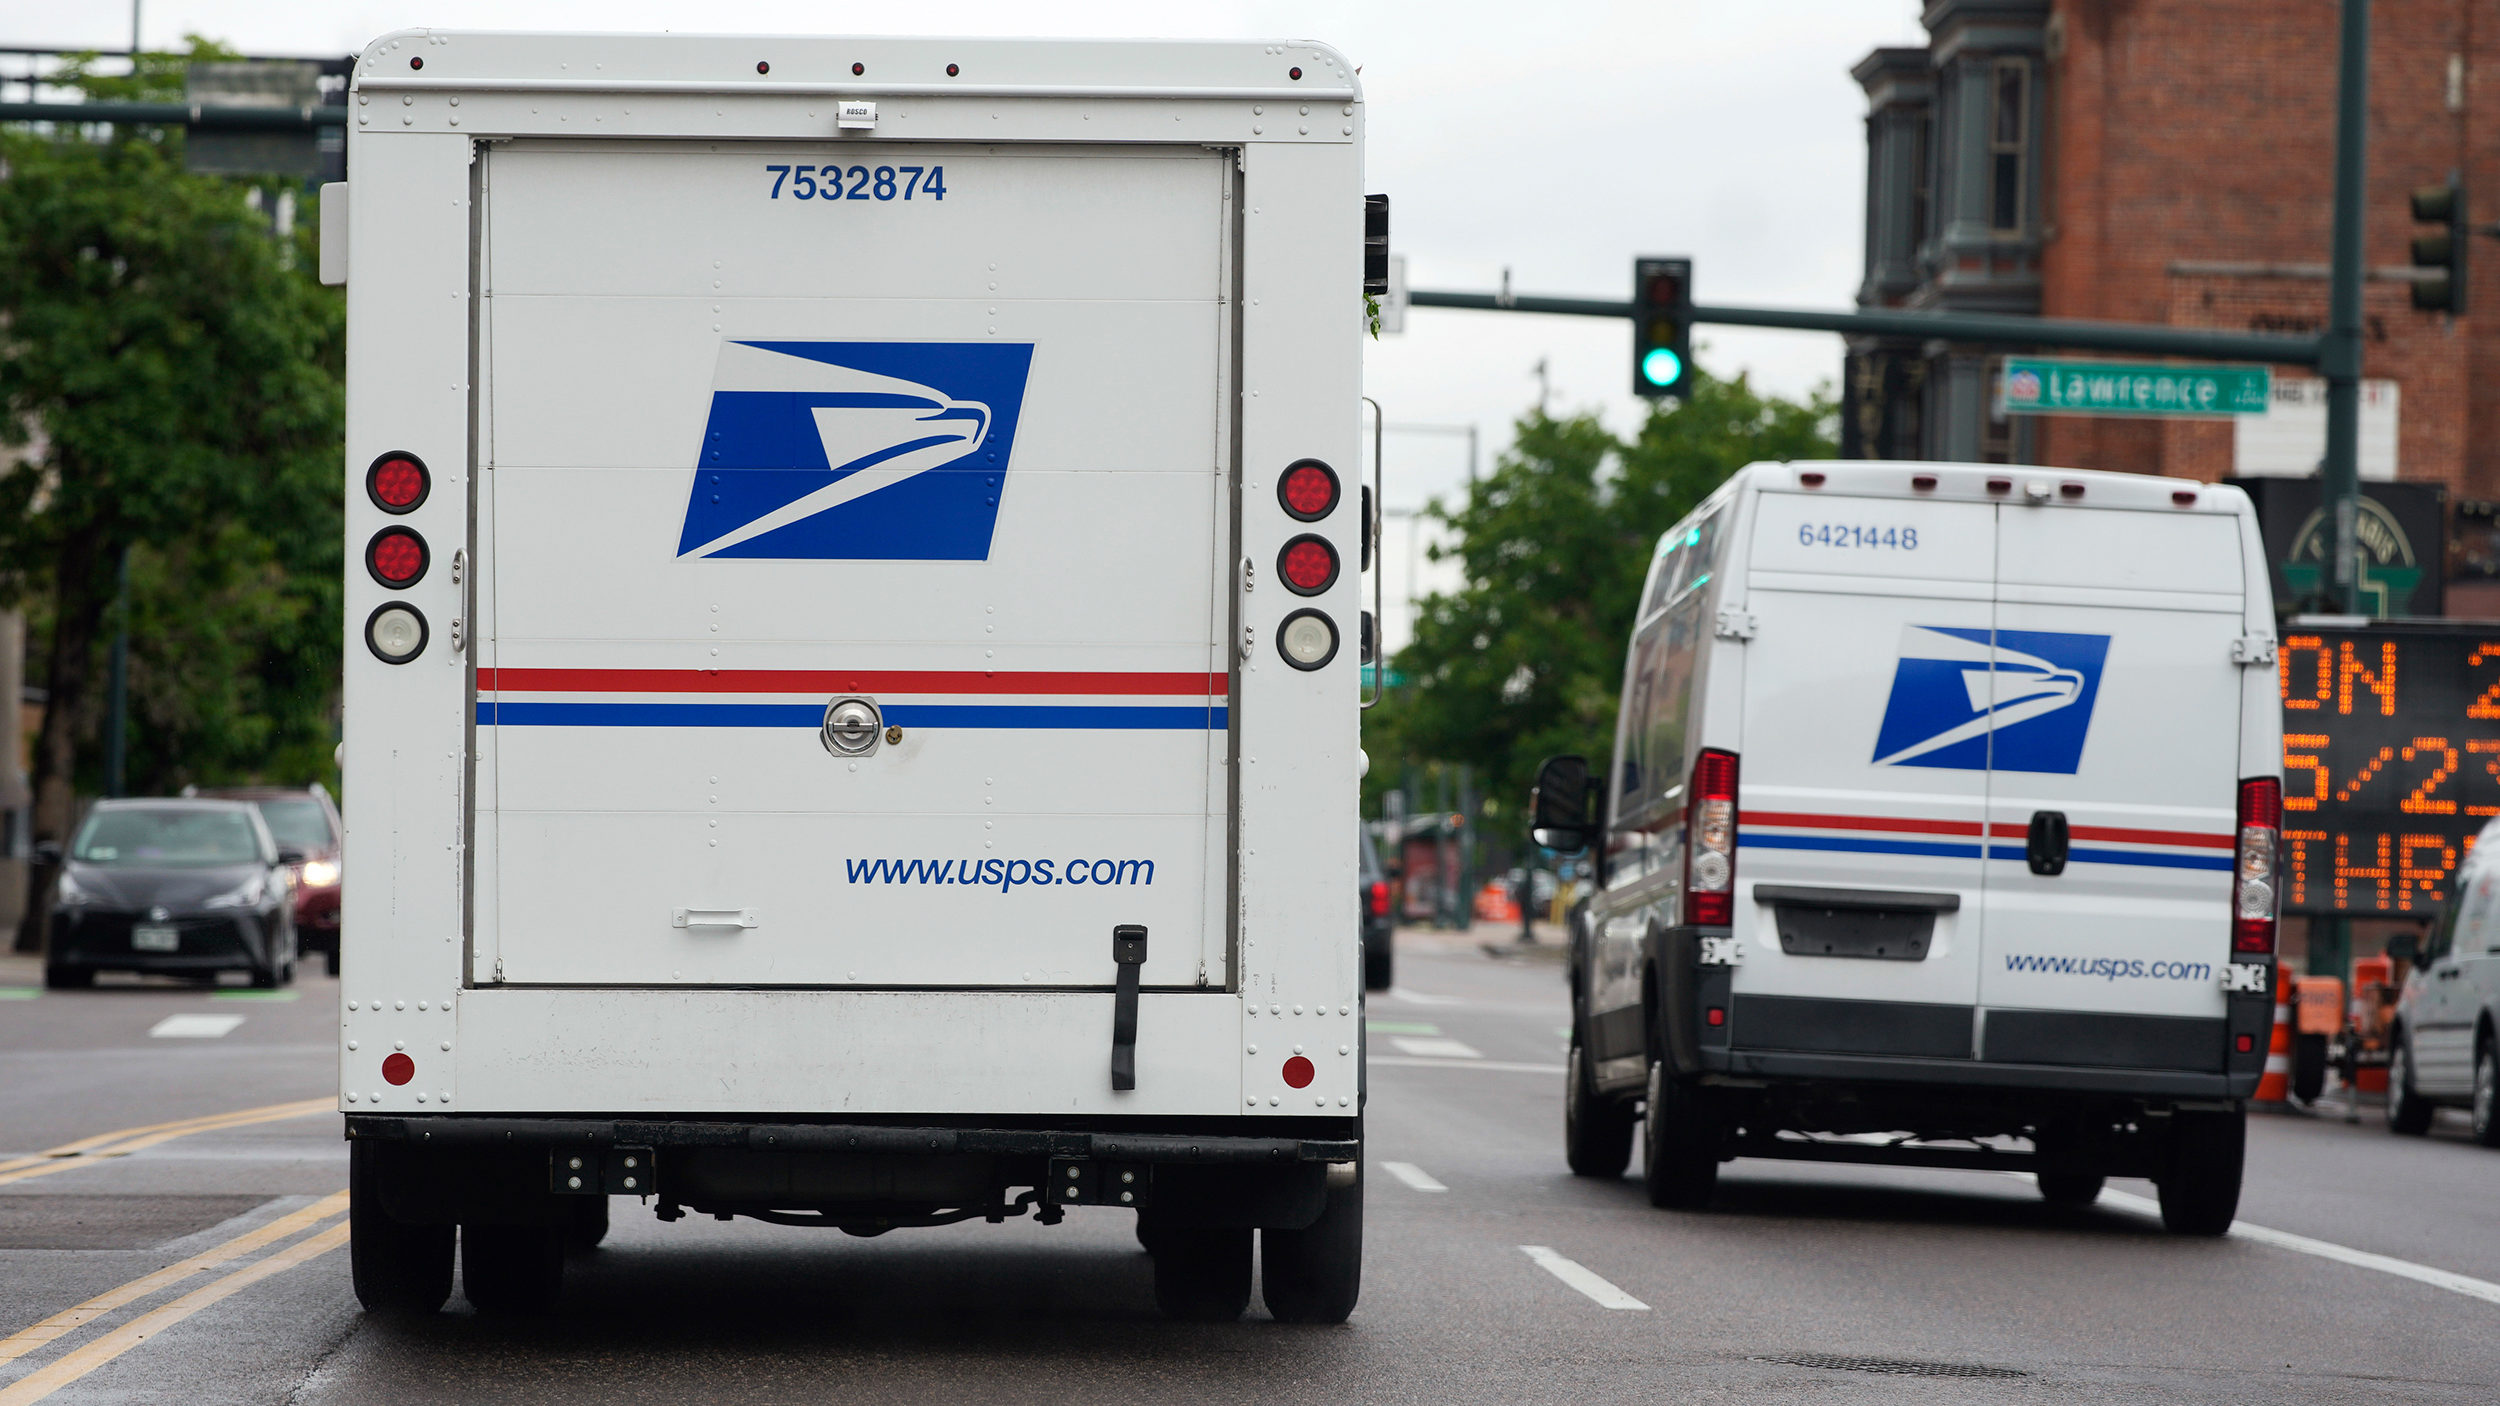 The US Postal Service proposed increased prices “to offset the rise in inflation,” according to...